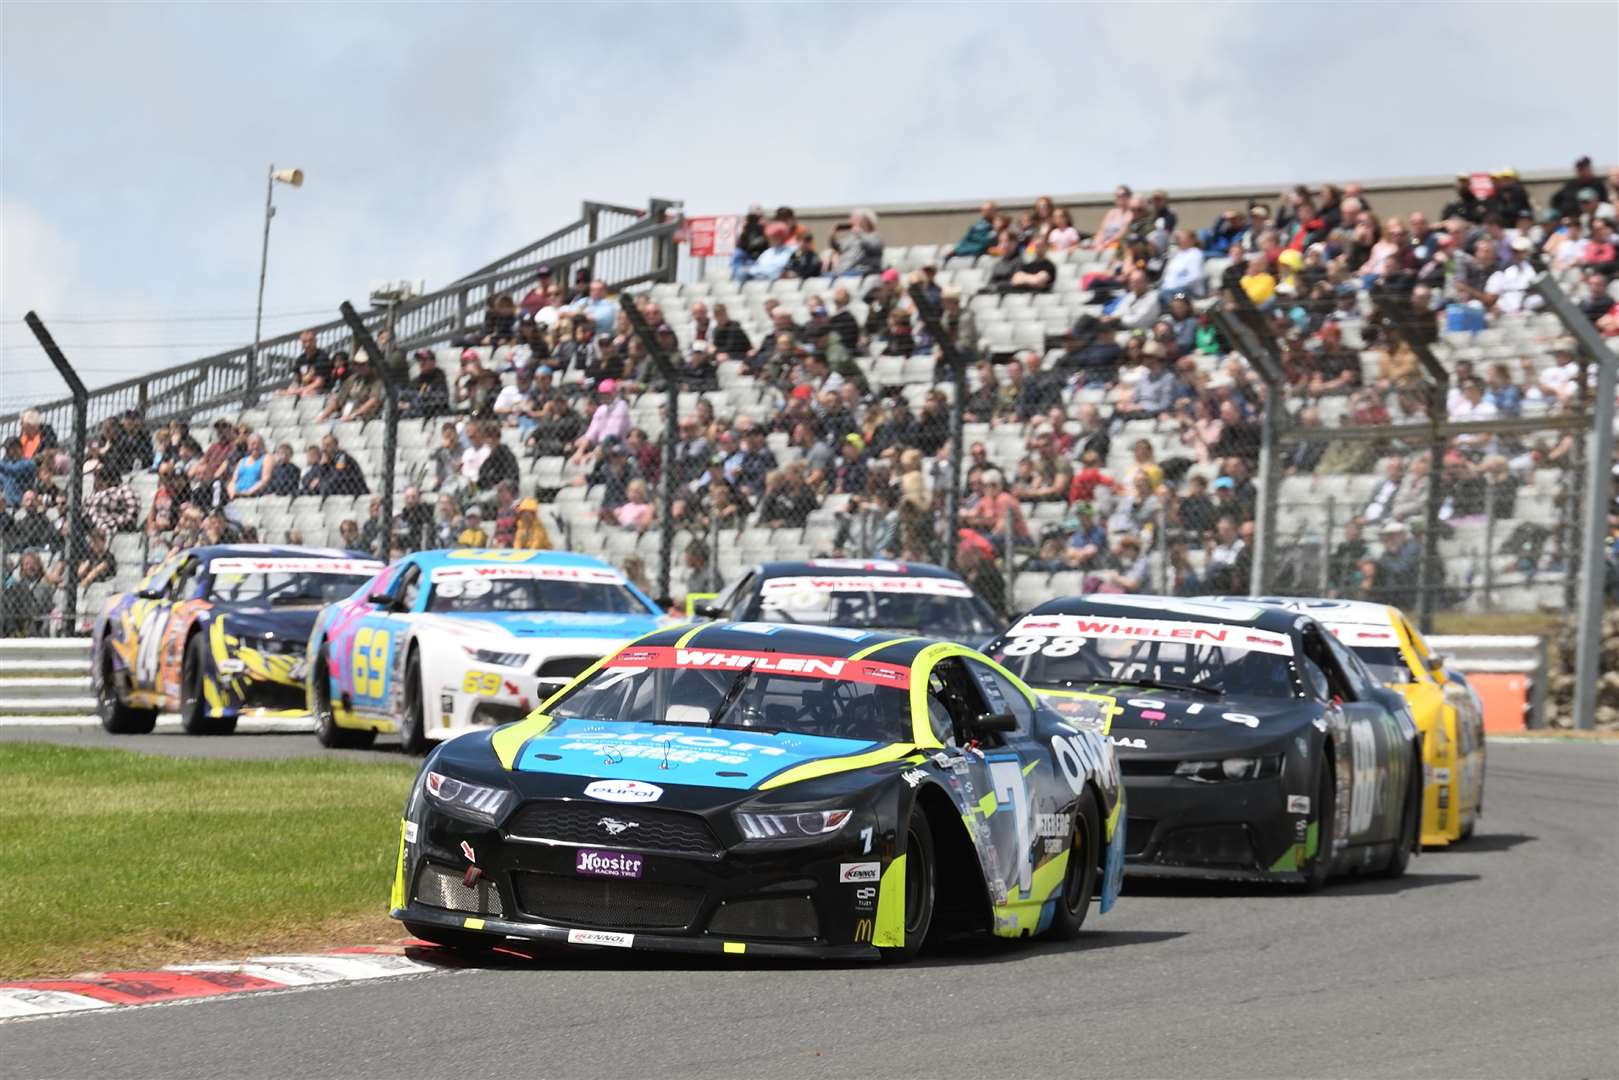 Championship leader Loris Hezemans (7) won the second NASCAR Whelen Euro Series Pro race, with Alon Day (88) winning the first race. Picture: Simon Hildrew